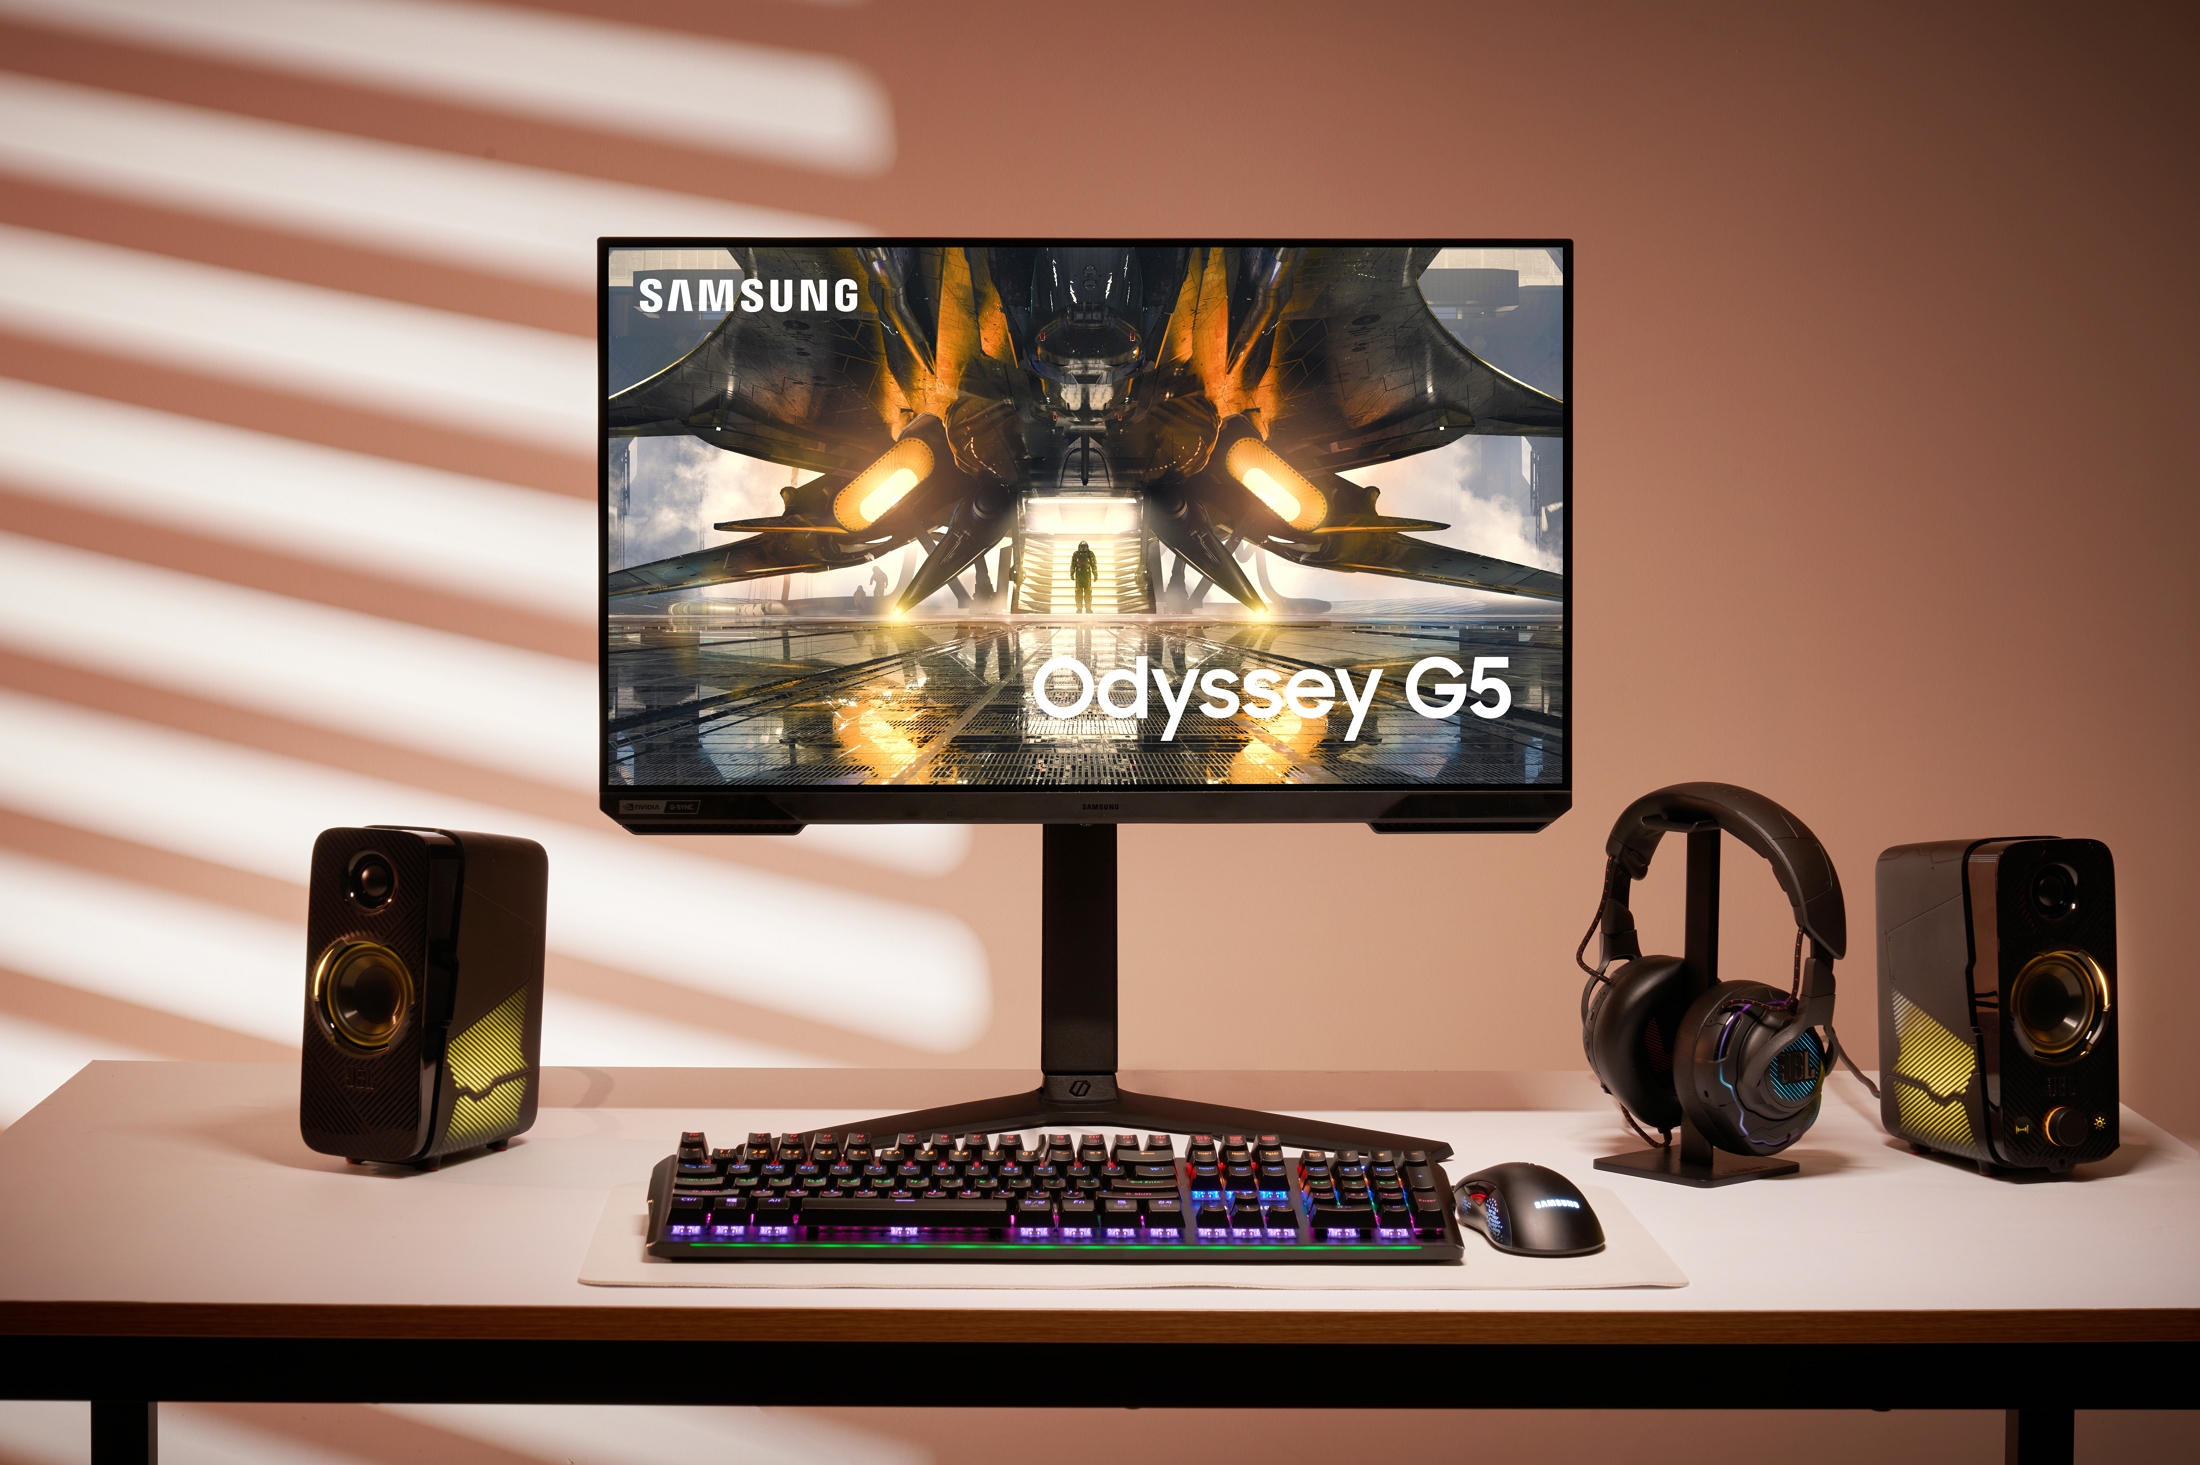 Samsung Odyssey G5 32 Inch Gaming Monitor Unboxing 